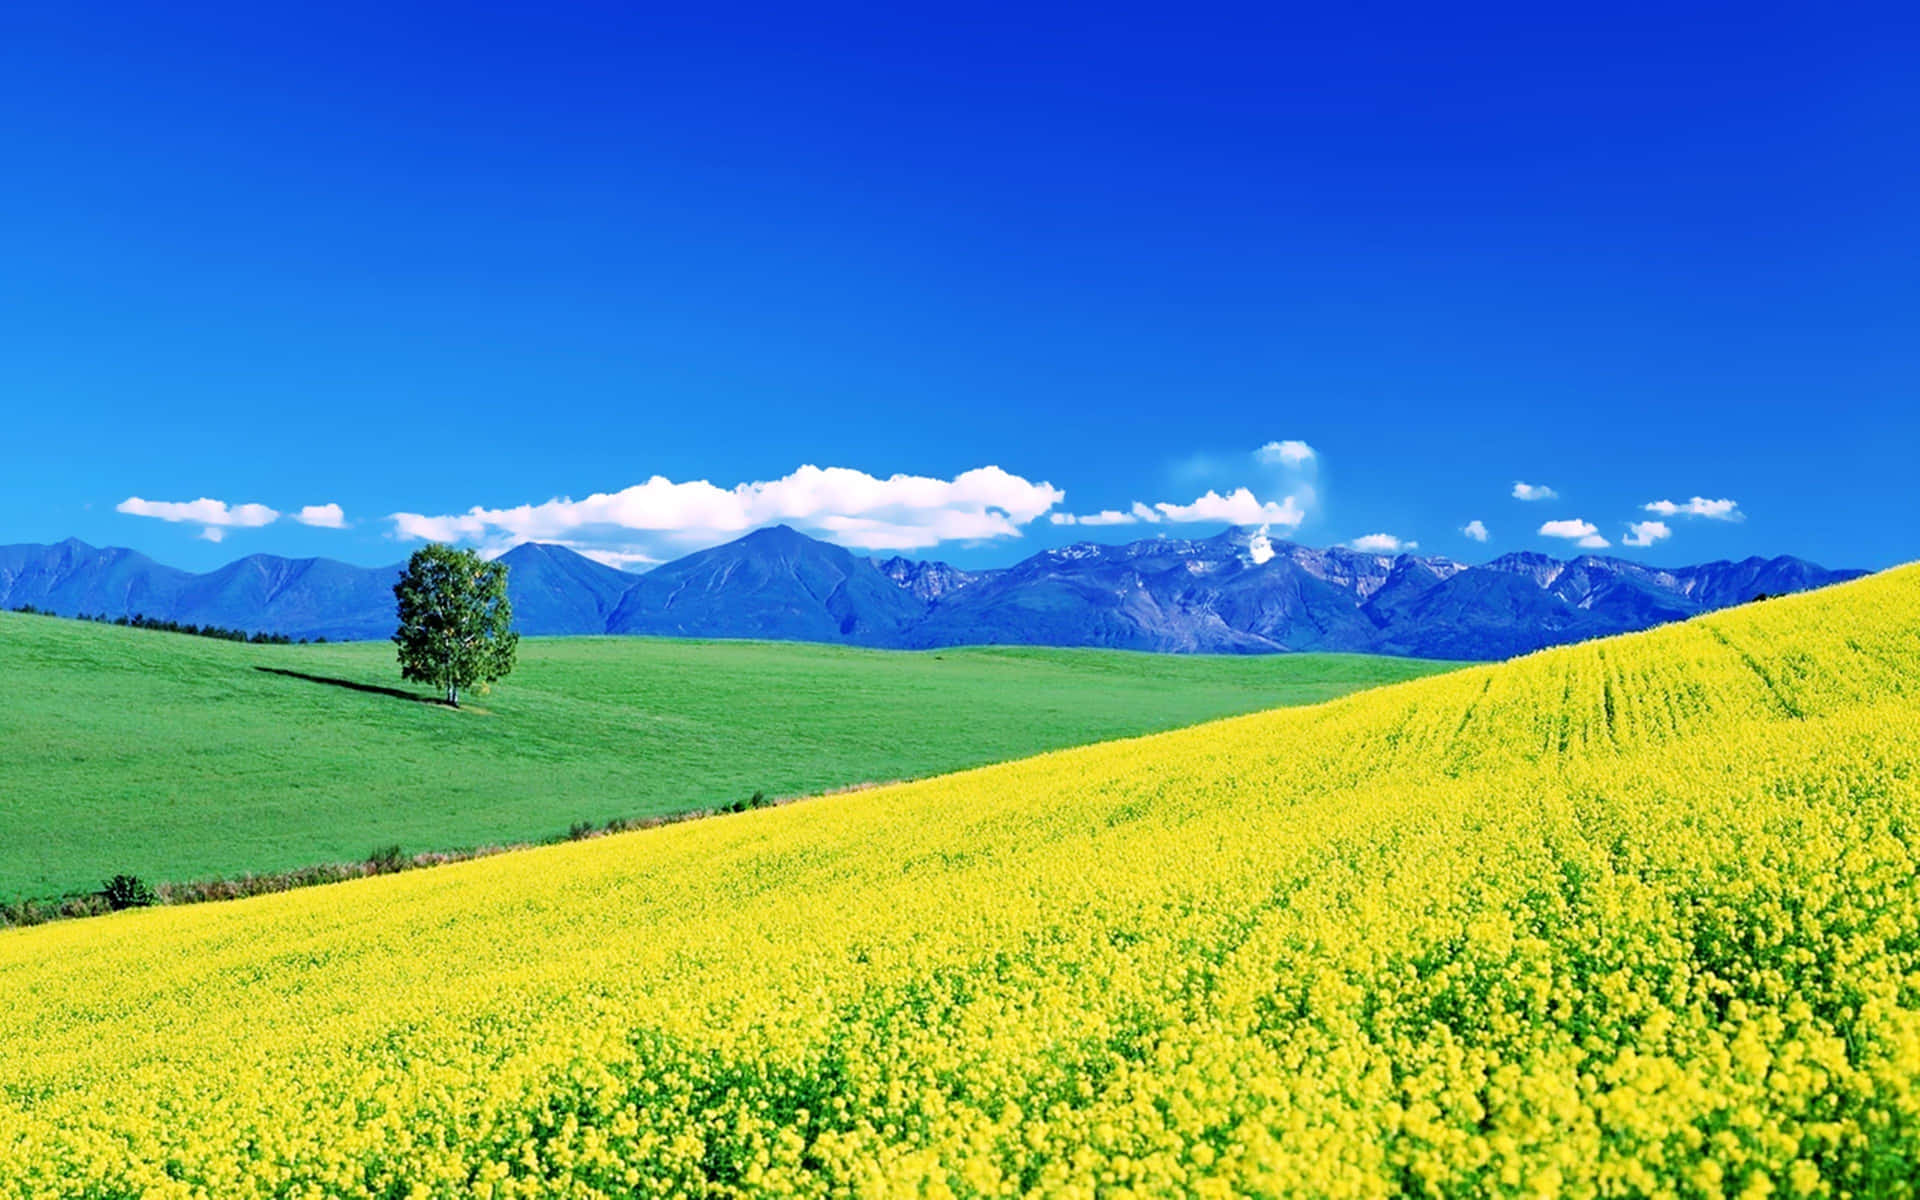 A Yellow Field With Mountains In The Background